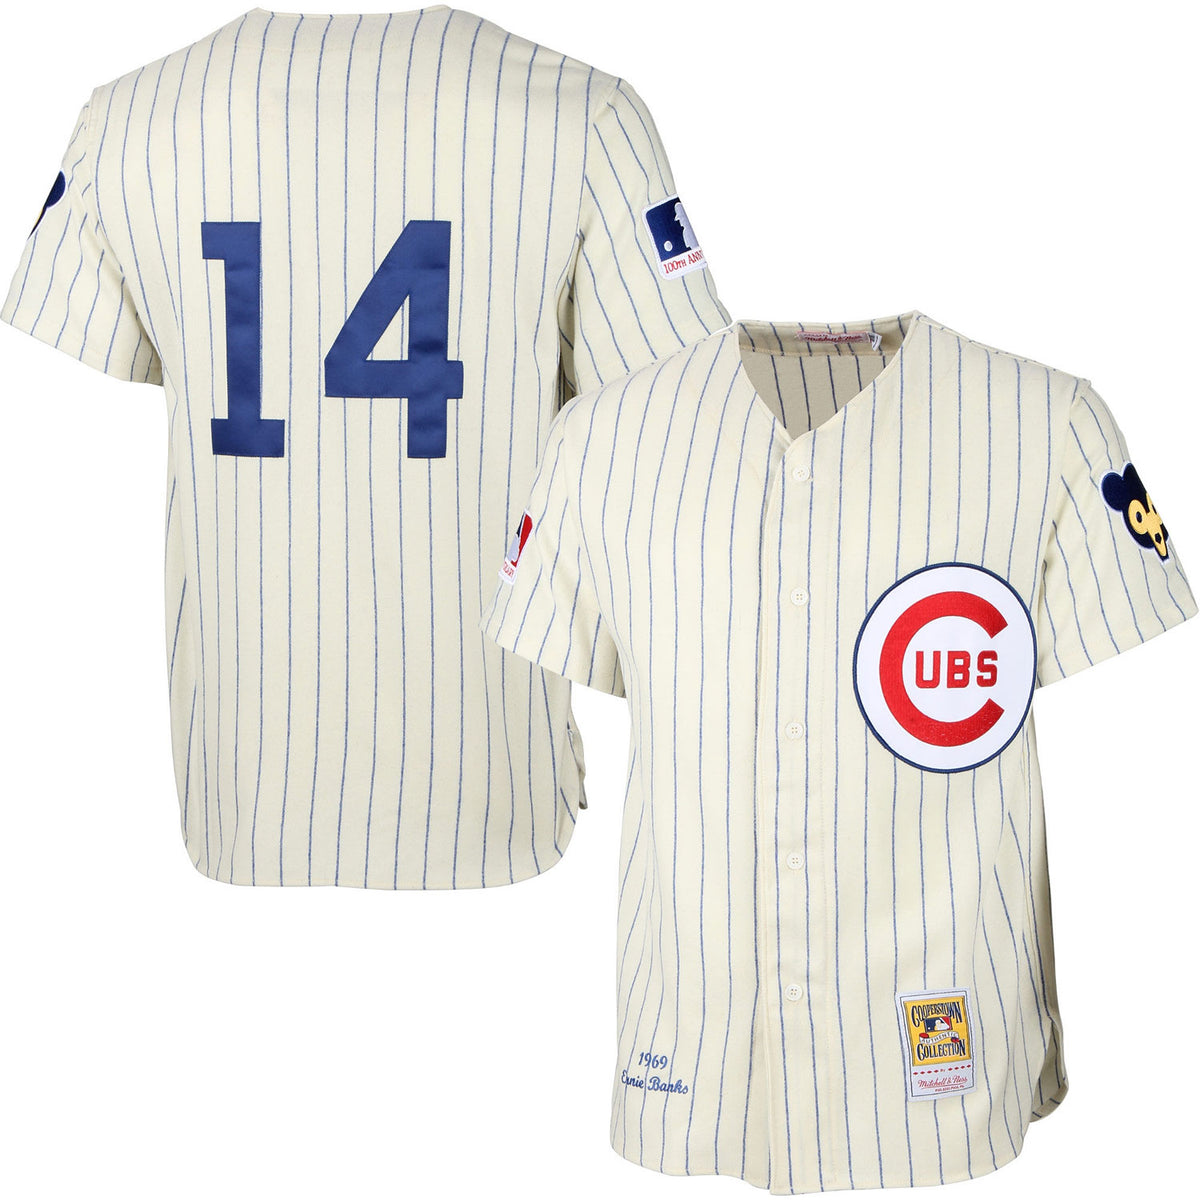 Ernie Banks #14, 1968 Chicago Cubs Jersey for Sale in Brooklyn